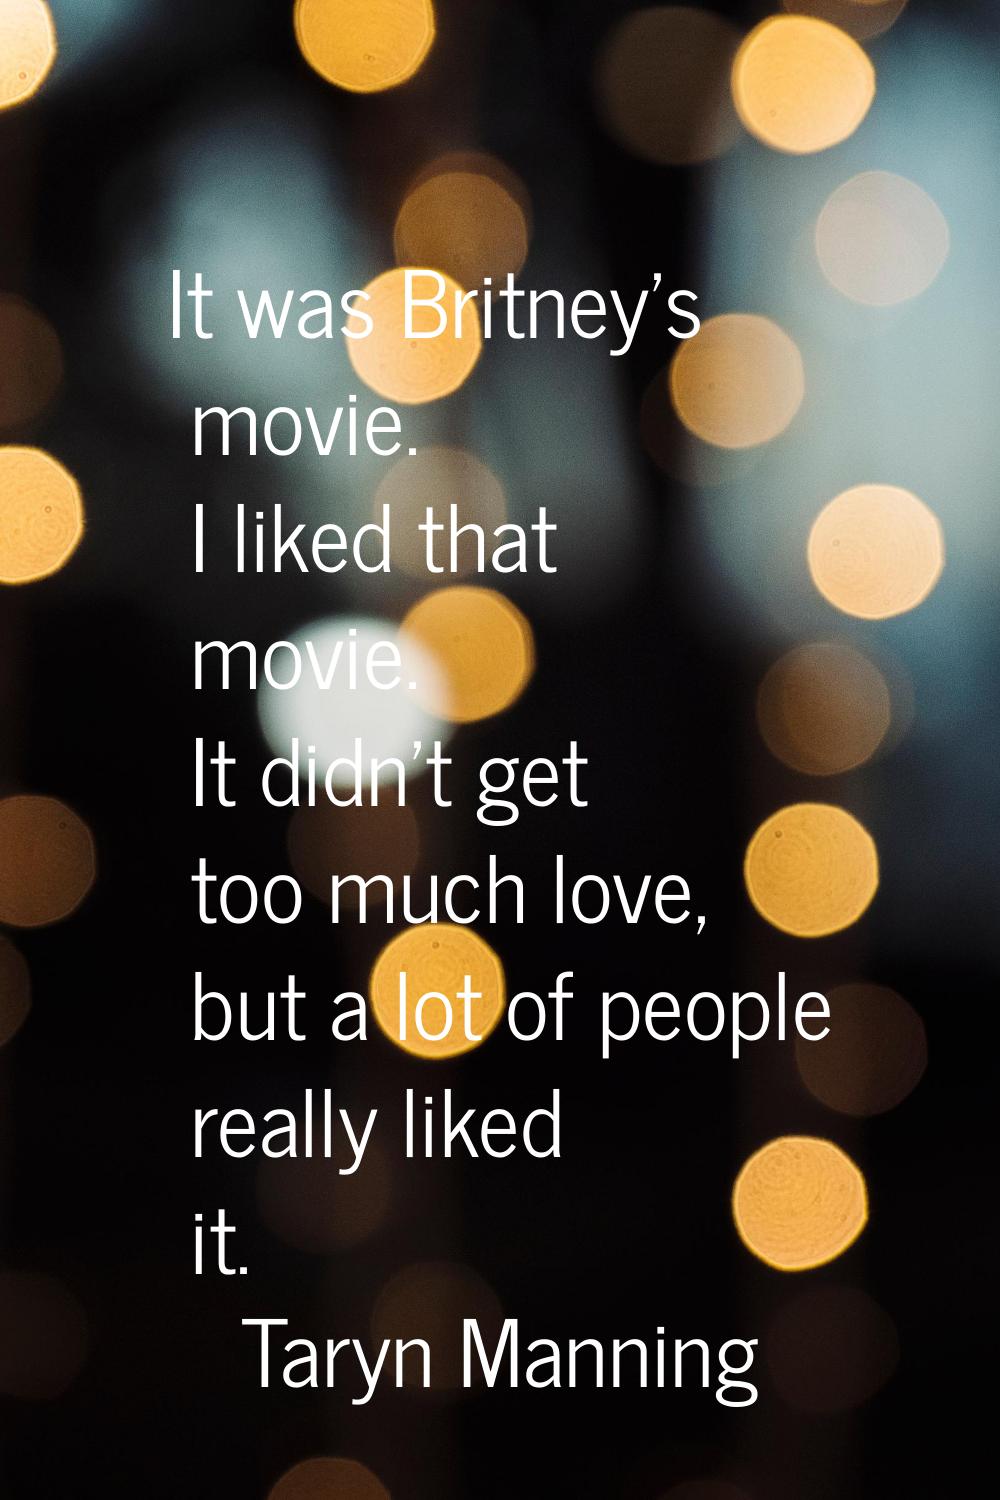 It was Britney's movie. I liked that movie. It didn't get too much love, but a lot of people really